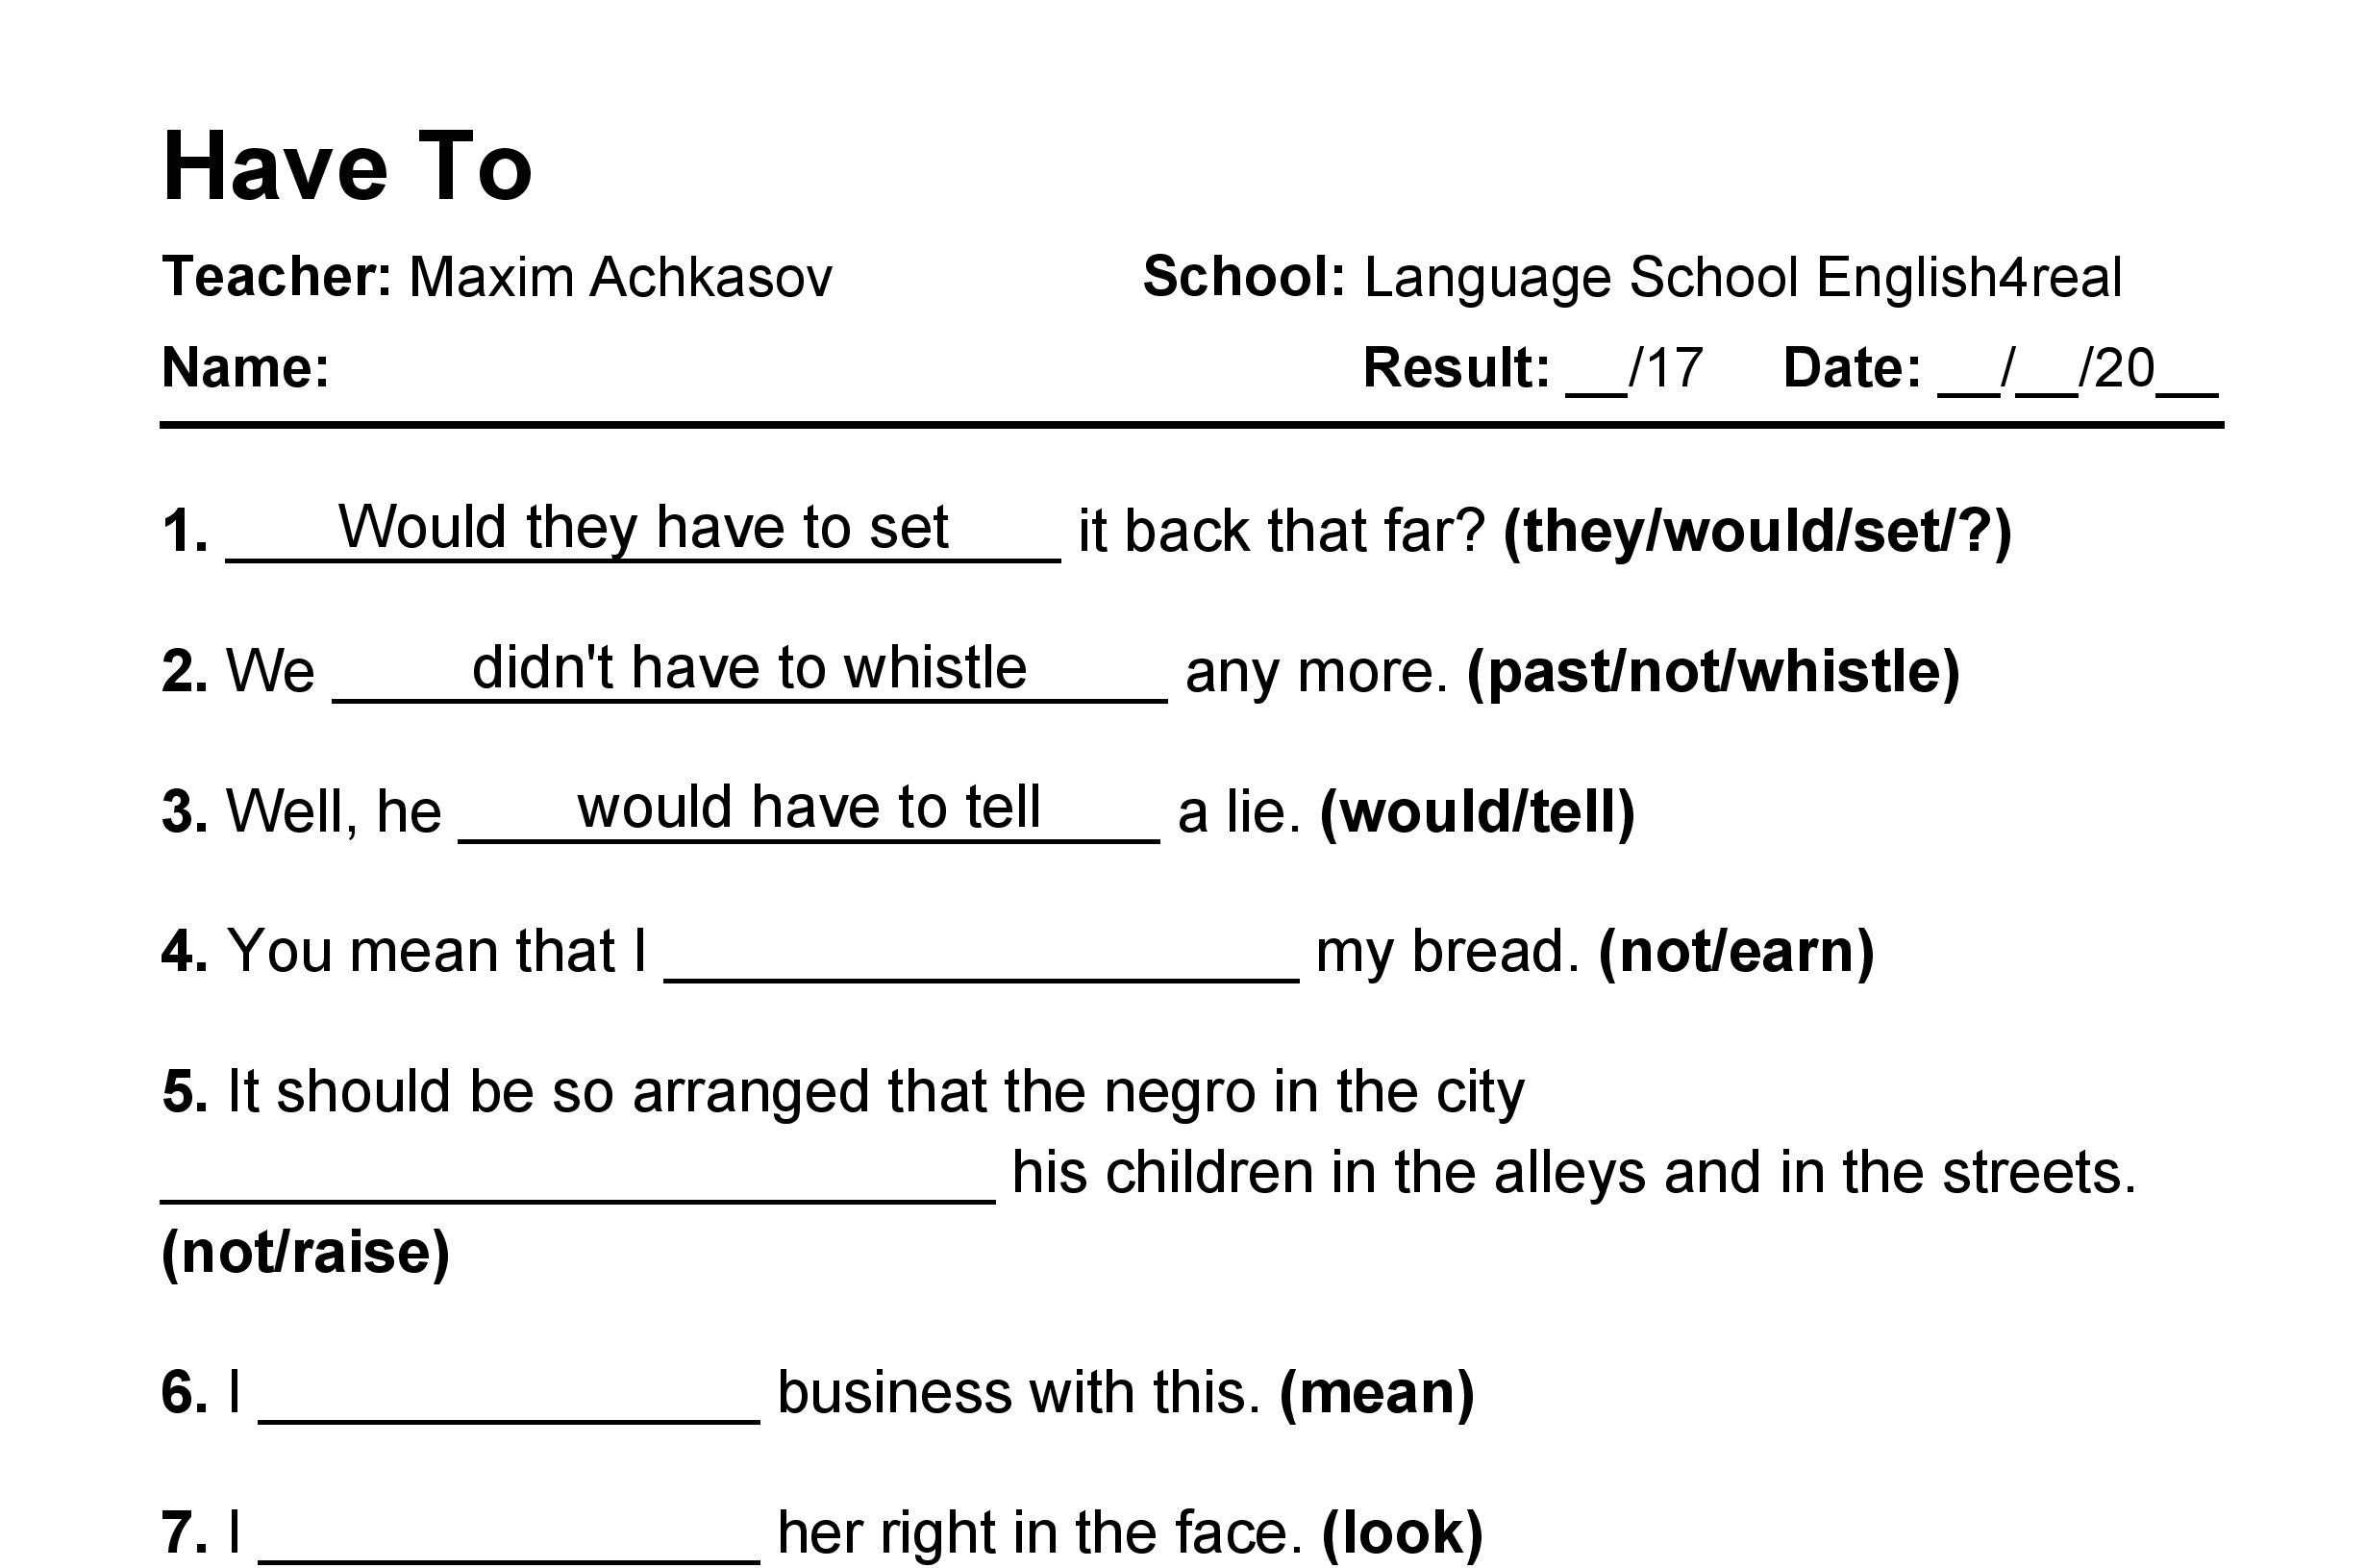 English grammar fill in the blanks exercises with answers in PDF - Have To